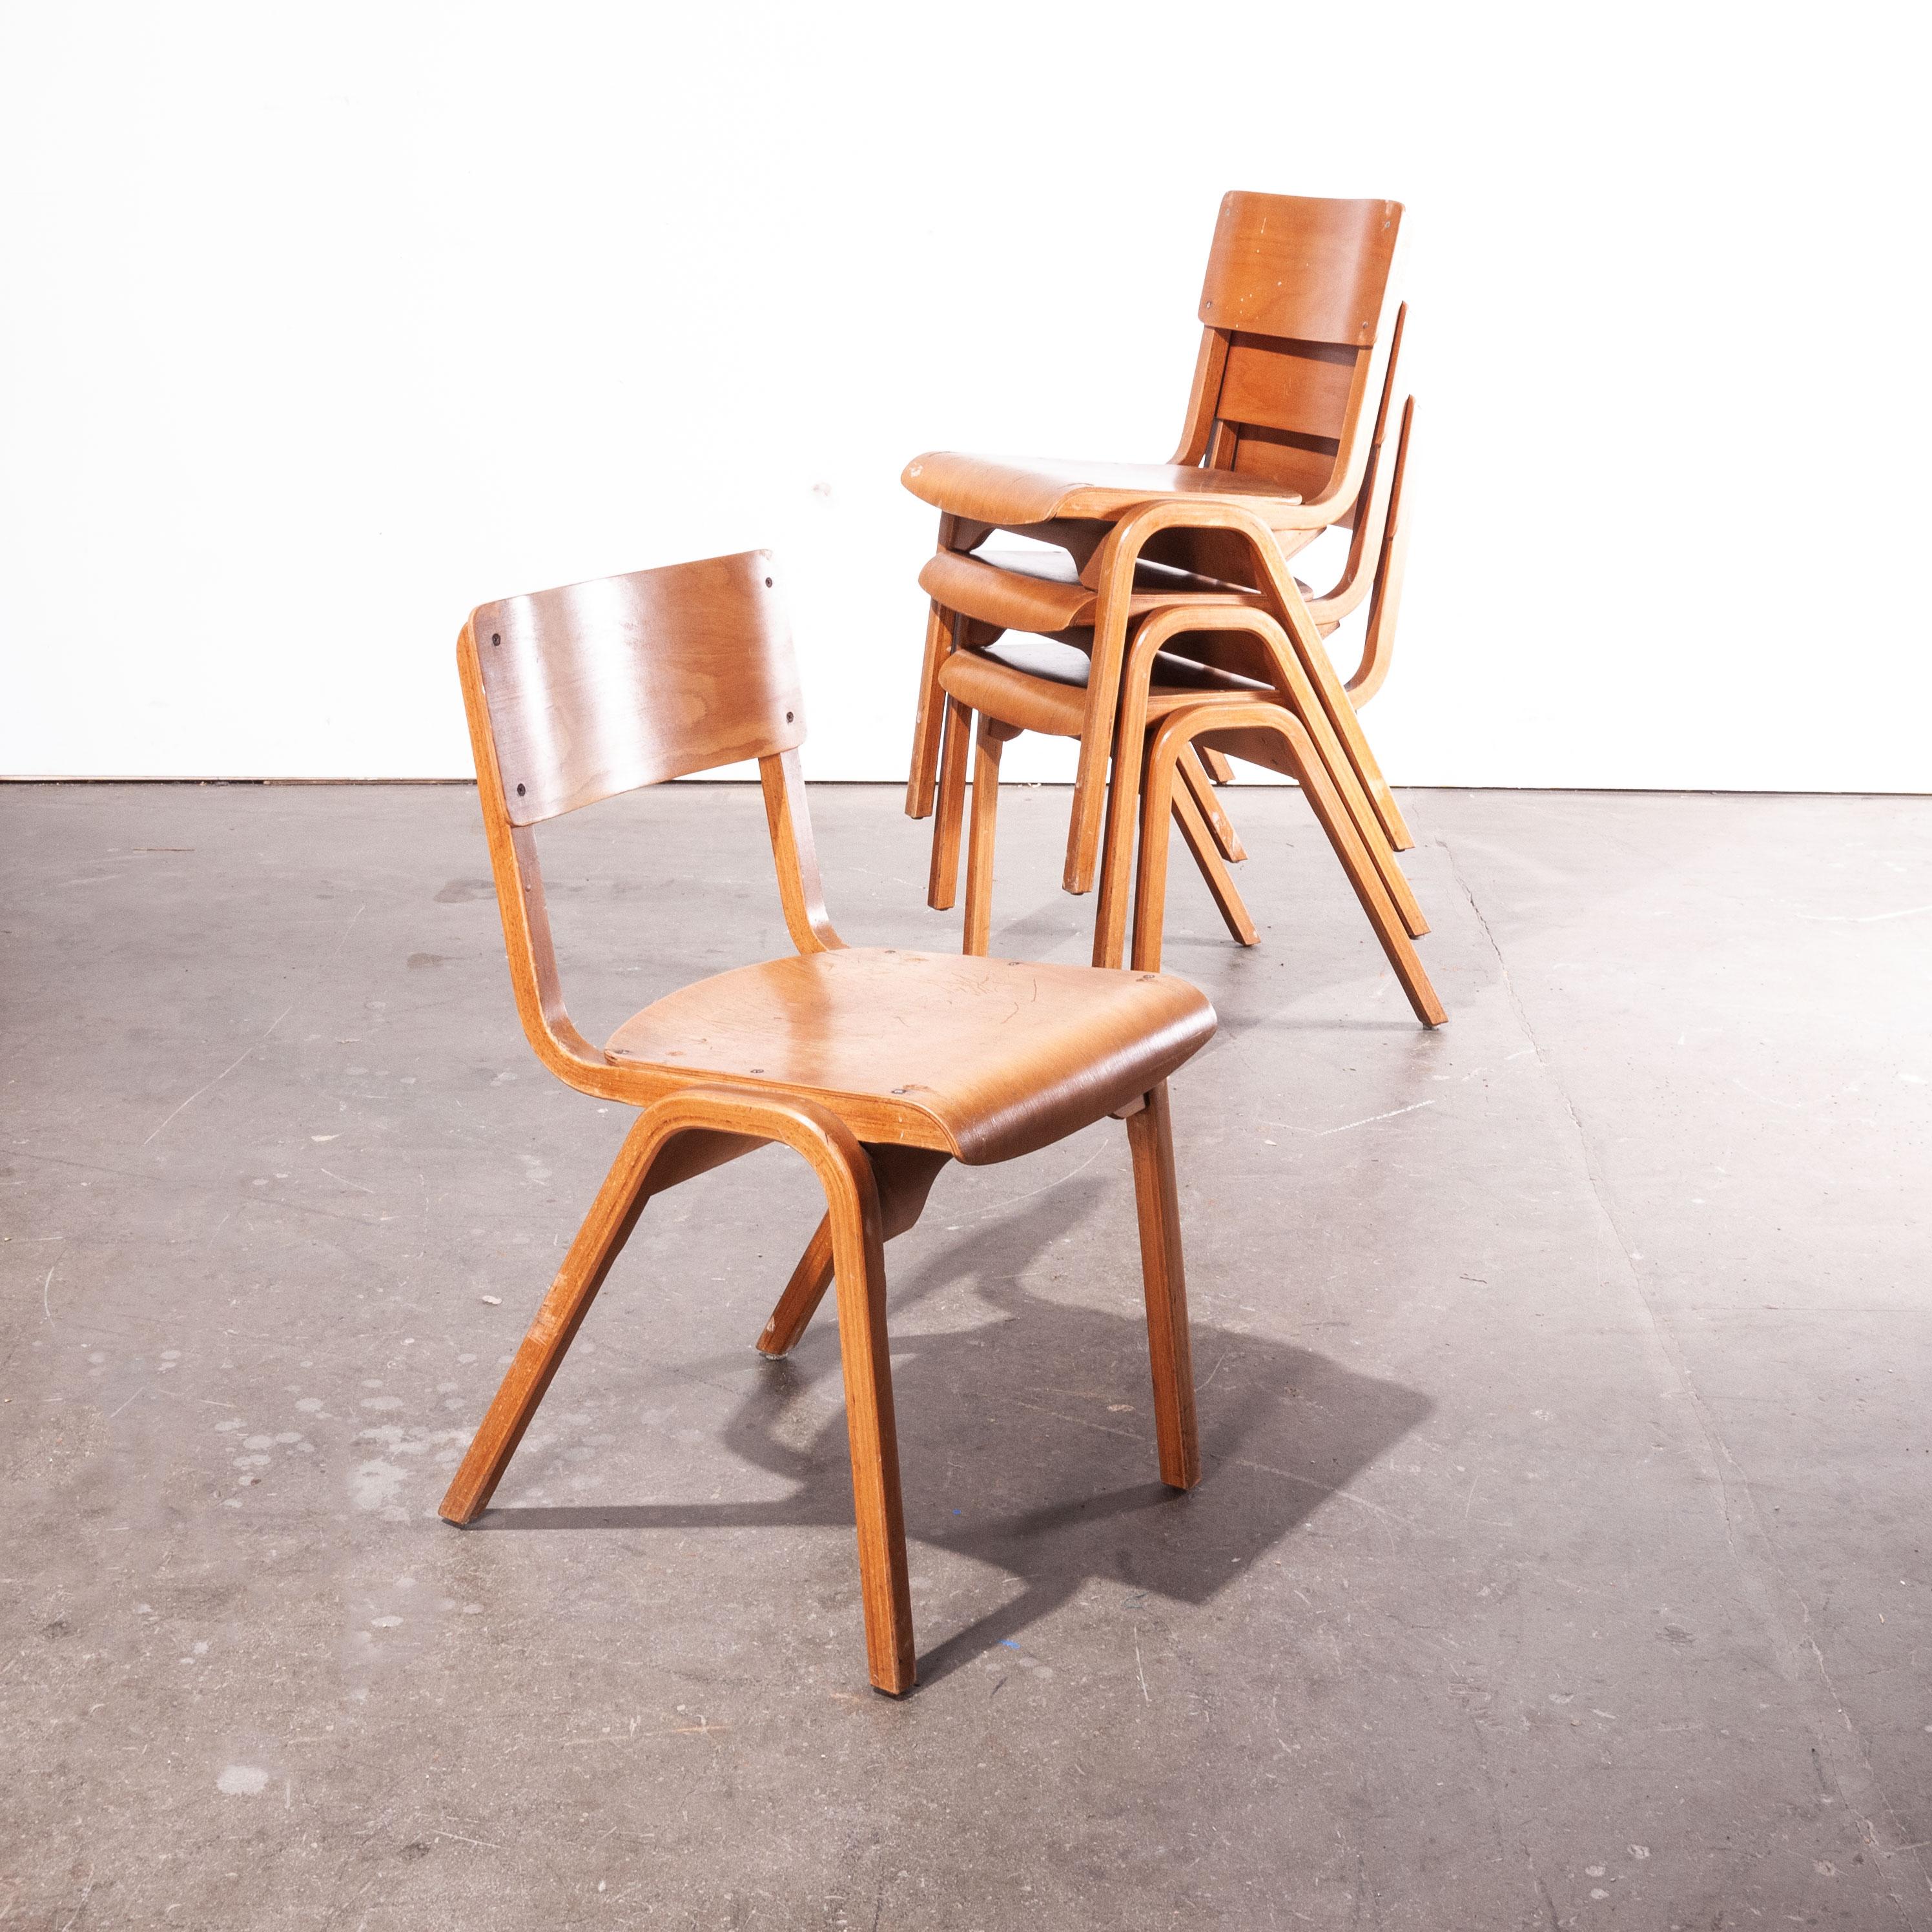 1950s stacking dining chairs by ESA James Leonard - Lamstak - set of four - other quantities available

Set of four 1950s rare vintage James Leonard ESA Esavian stacking dining chairs. This is one of our favourite model of chairs. Designed by